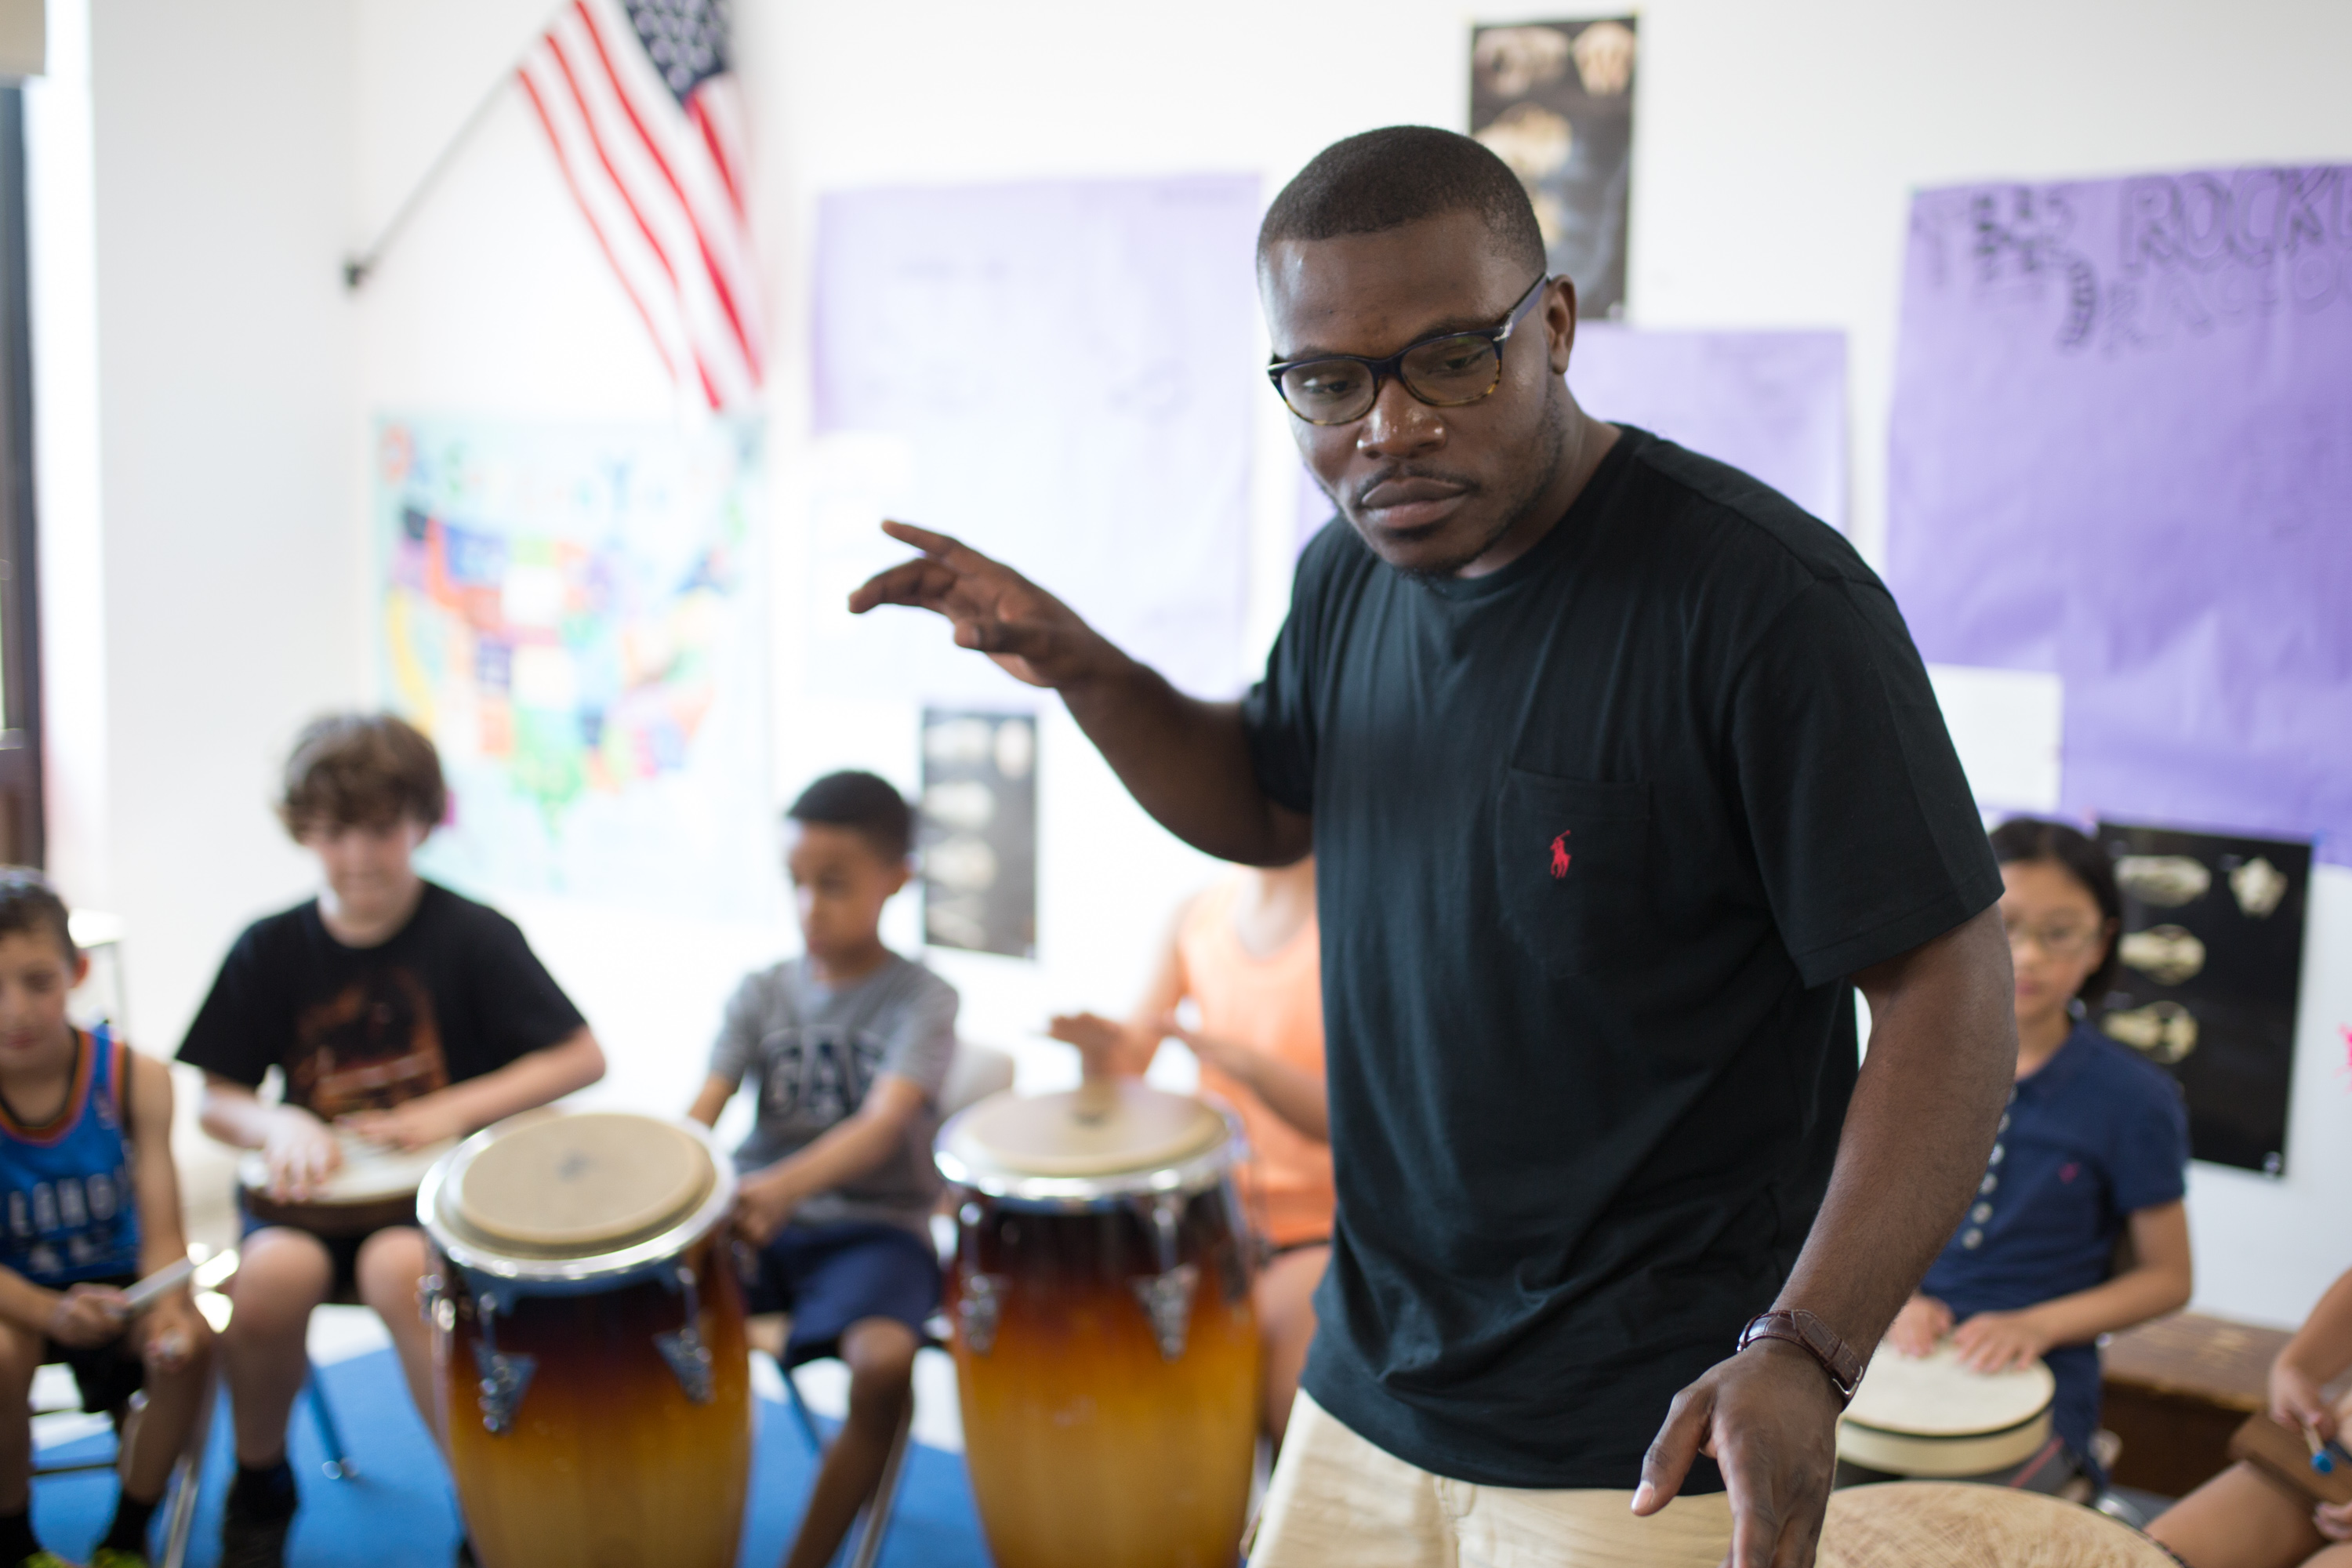 Jonathan Mande teaching a drum class with young children in a circle around him, each child holding a drum